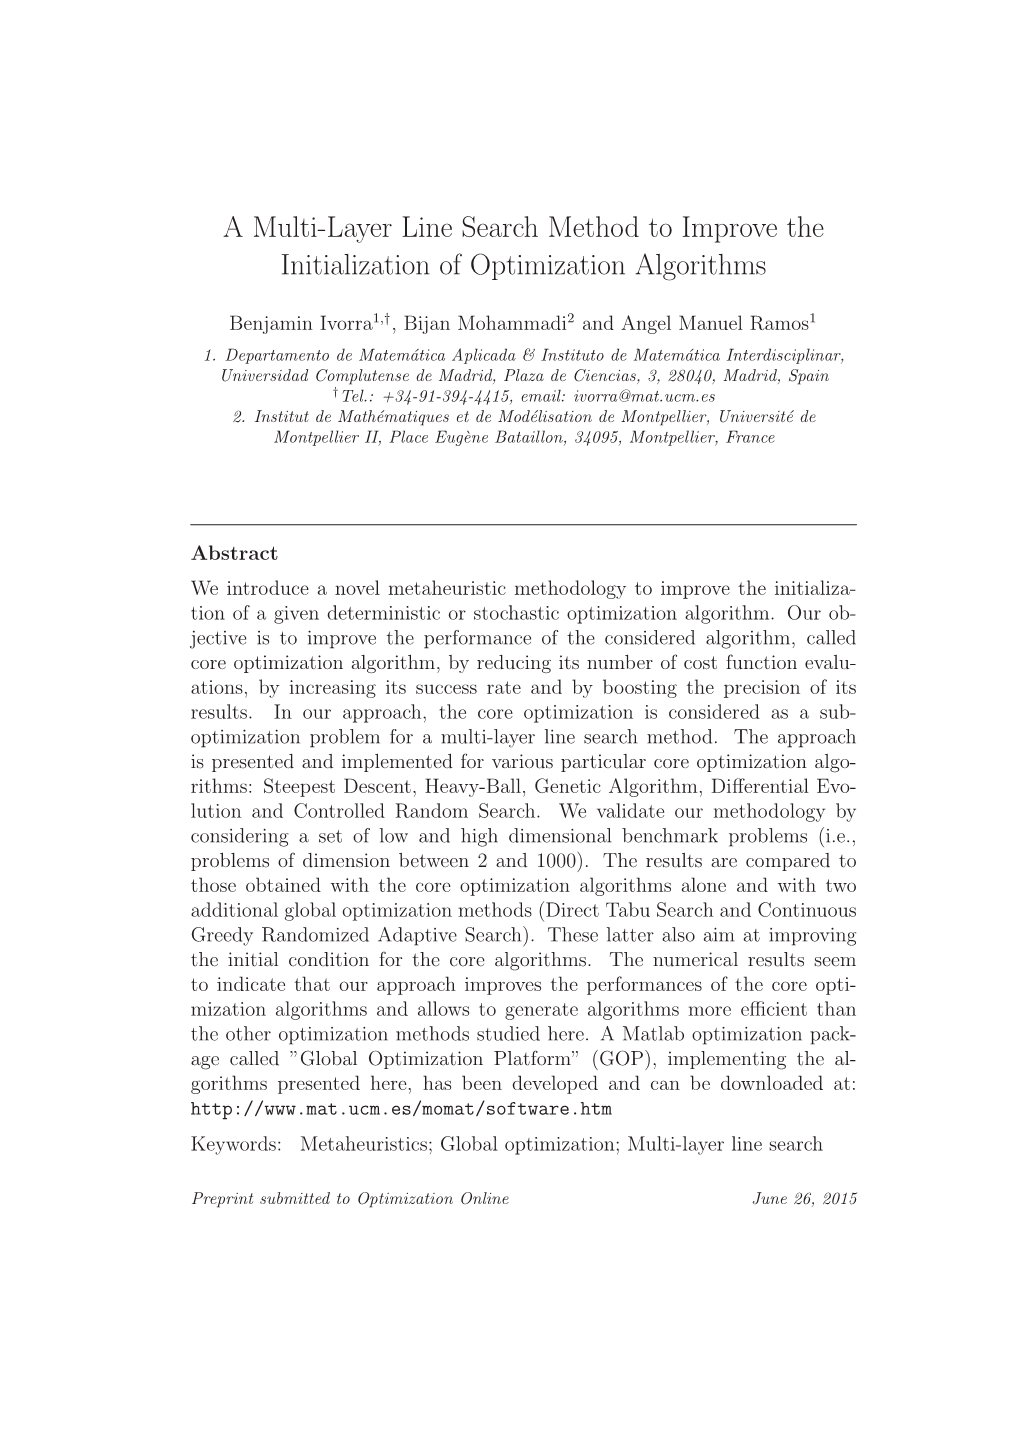 A Multi-Layer Line Search Method to Improve the Initialization of Optimization Algorithms